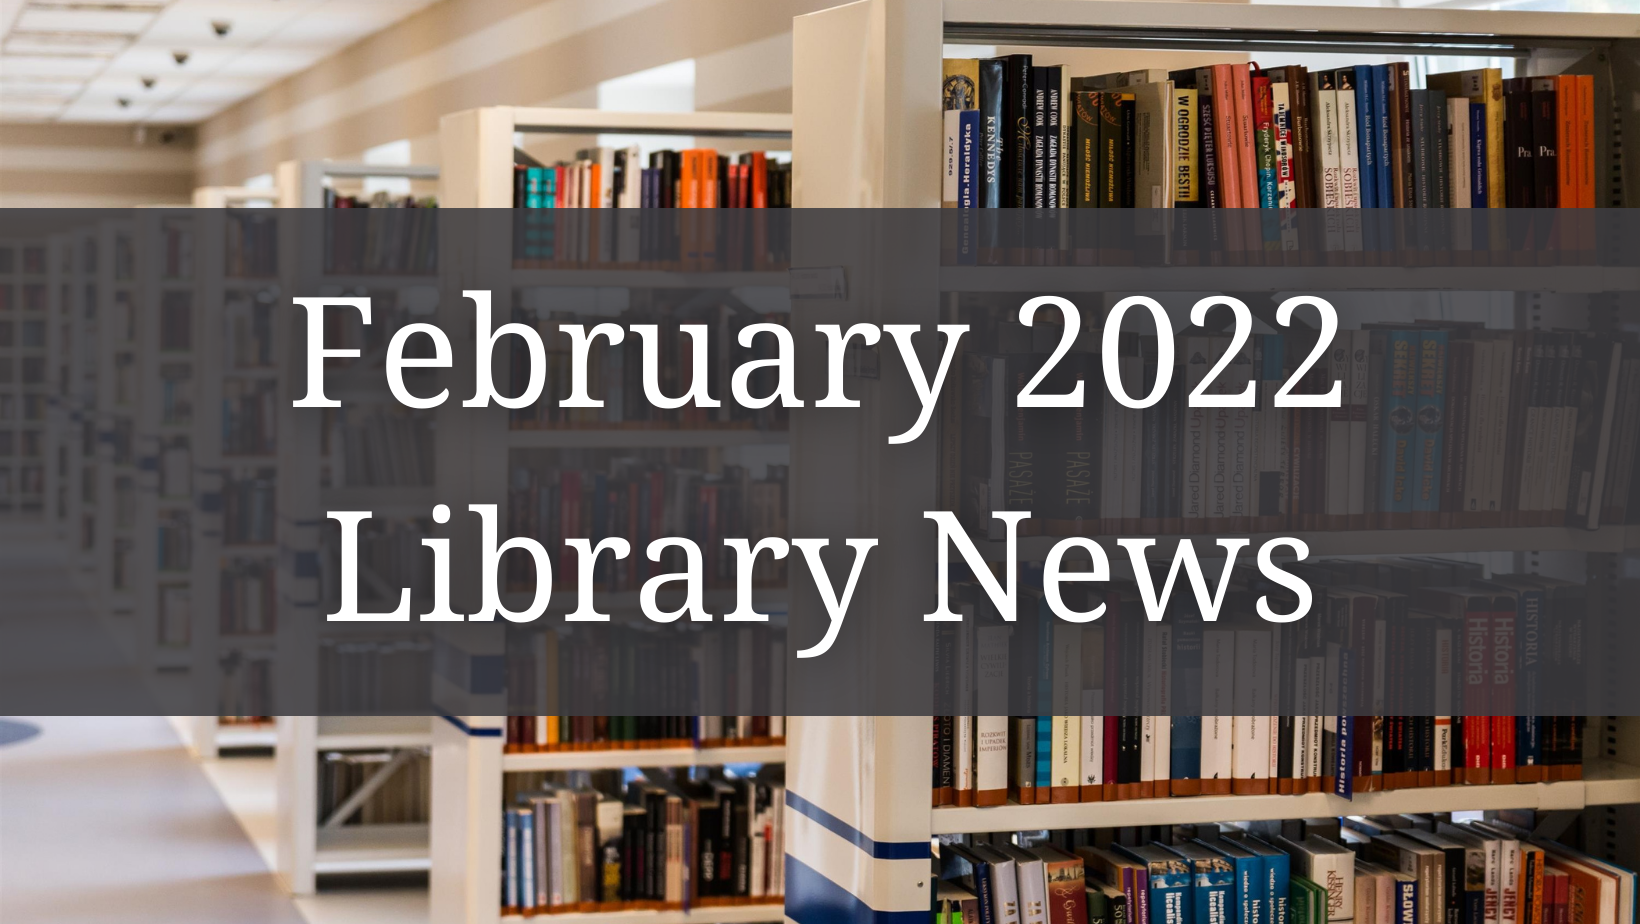 Updates from the Albert L. Scott Library